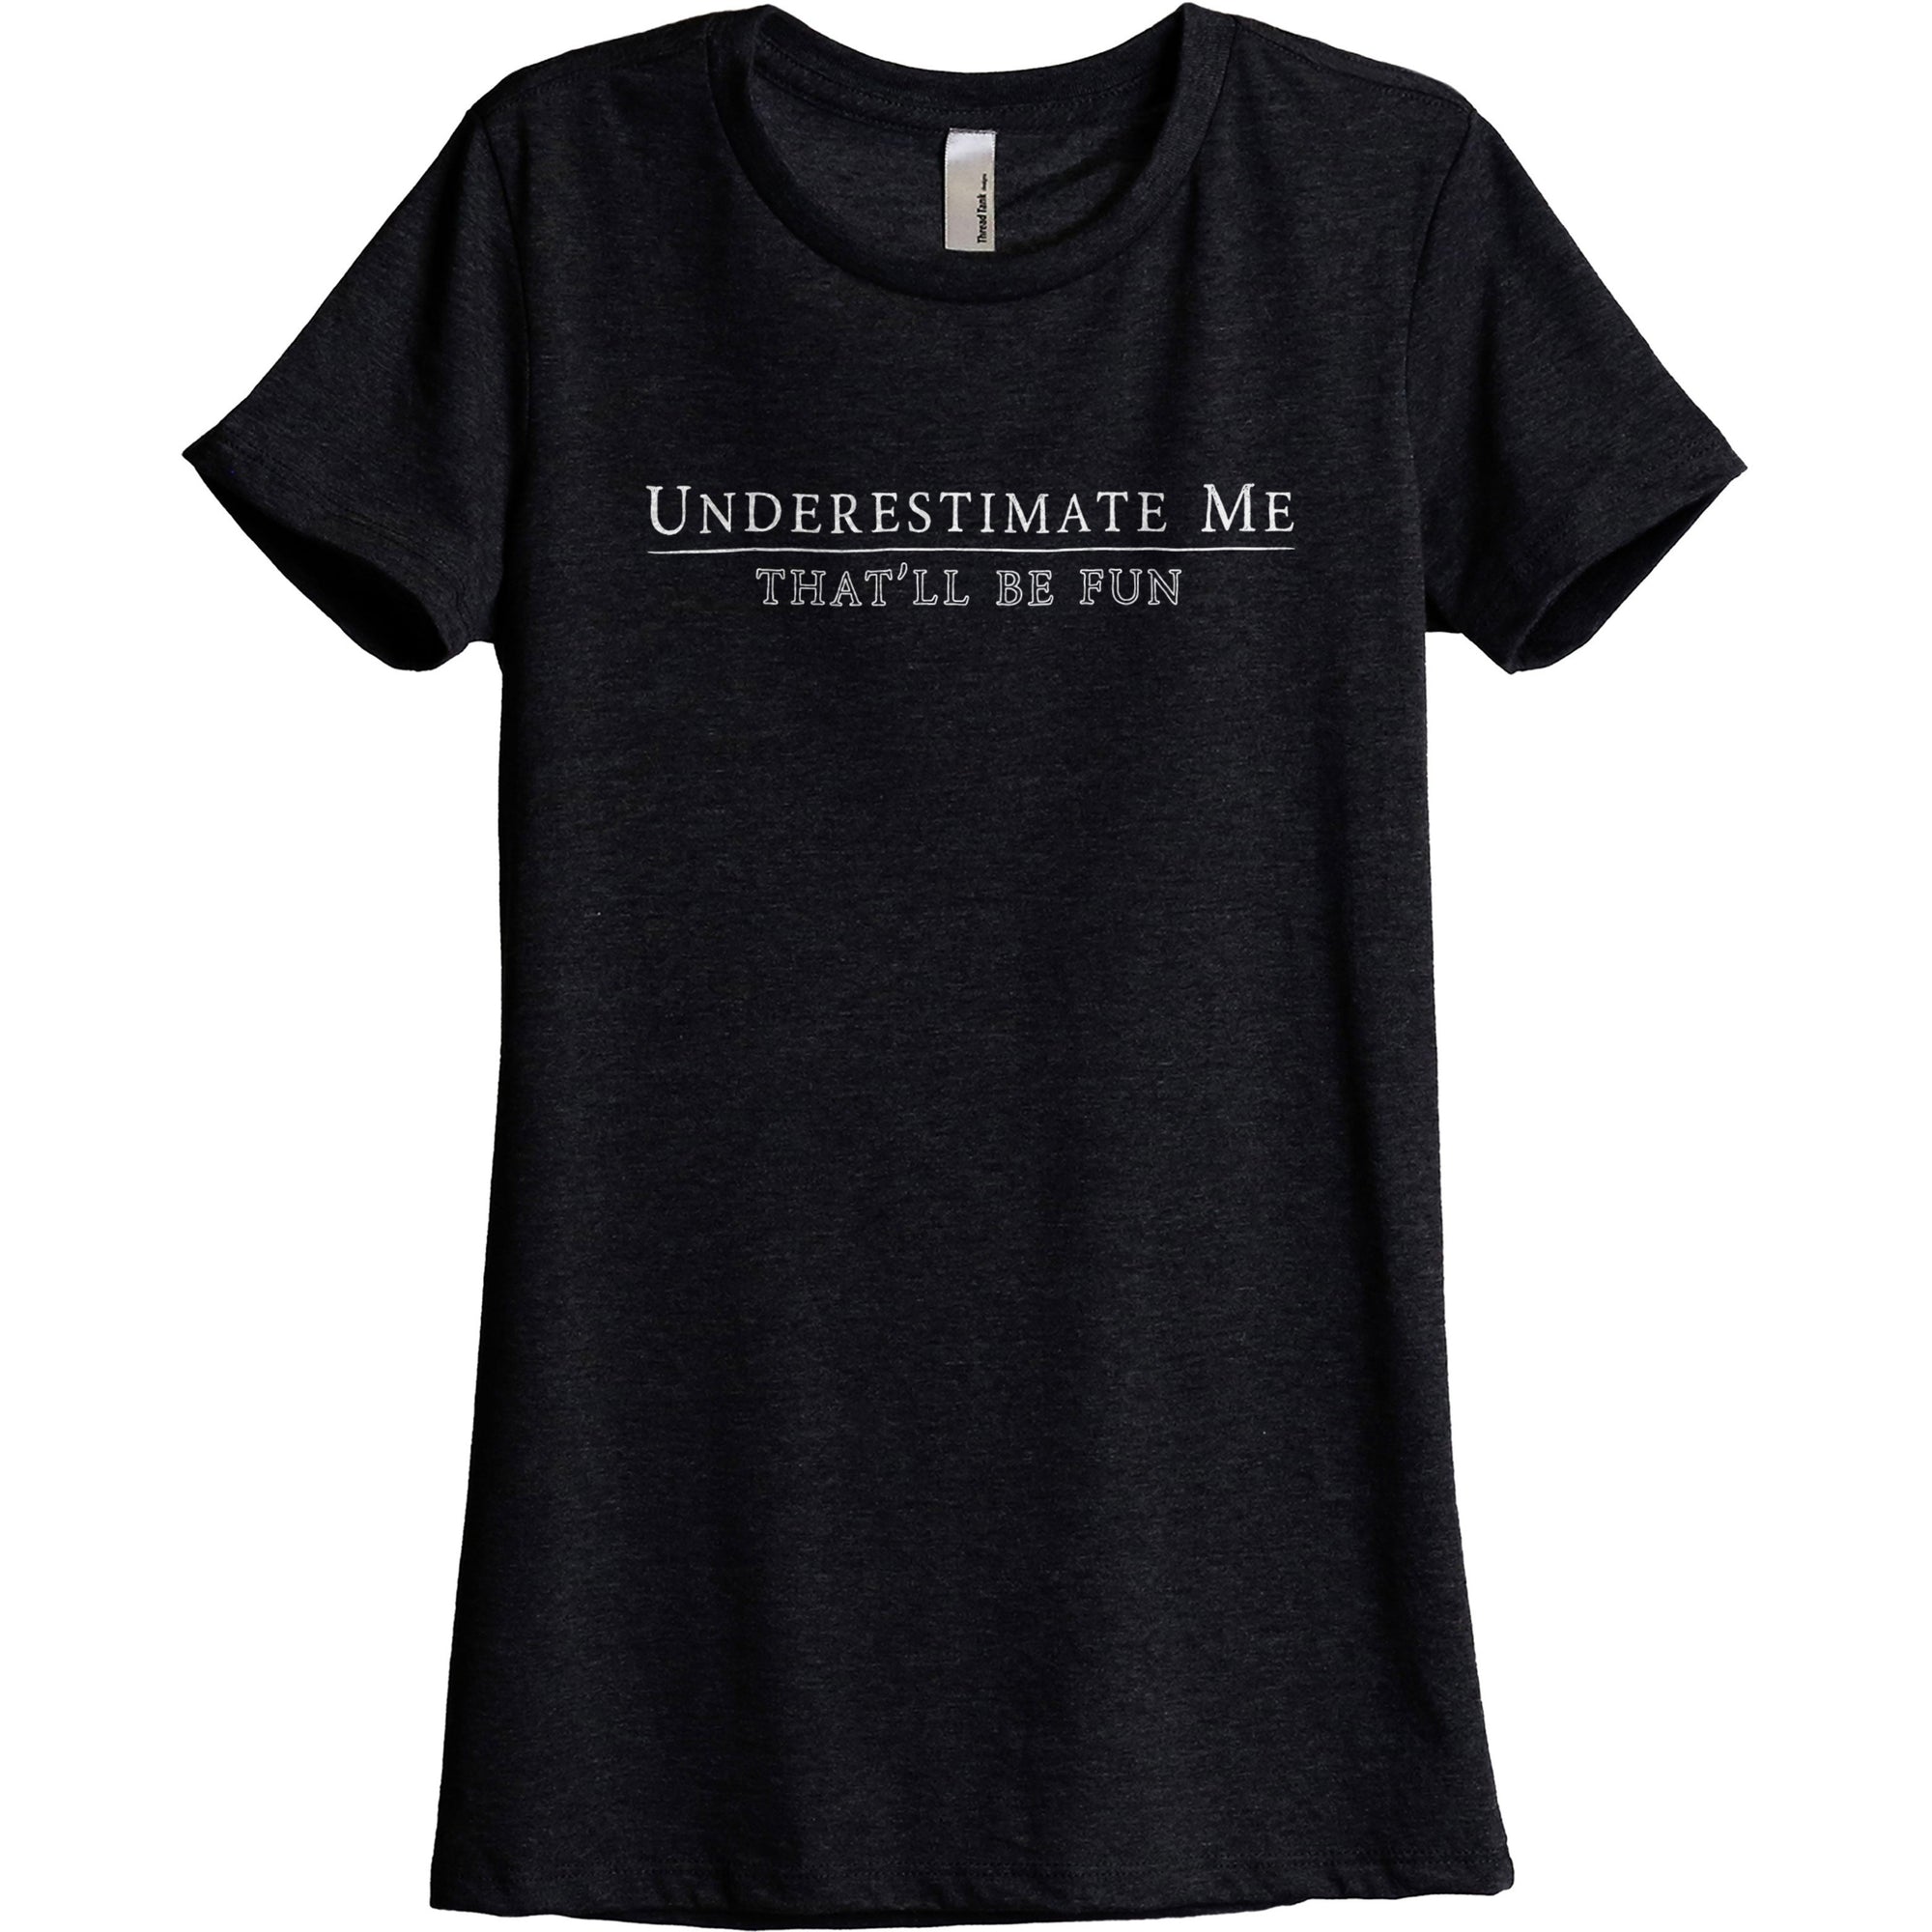 8. Underestimate Me - That'll Be Fun - Stories You Can Wear by Thread Tank